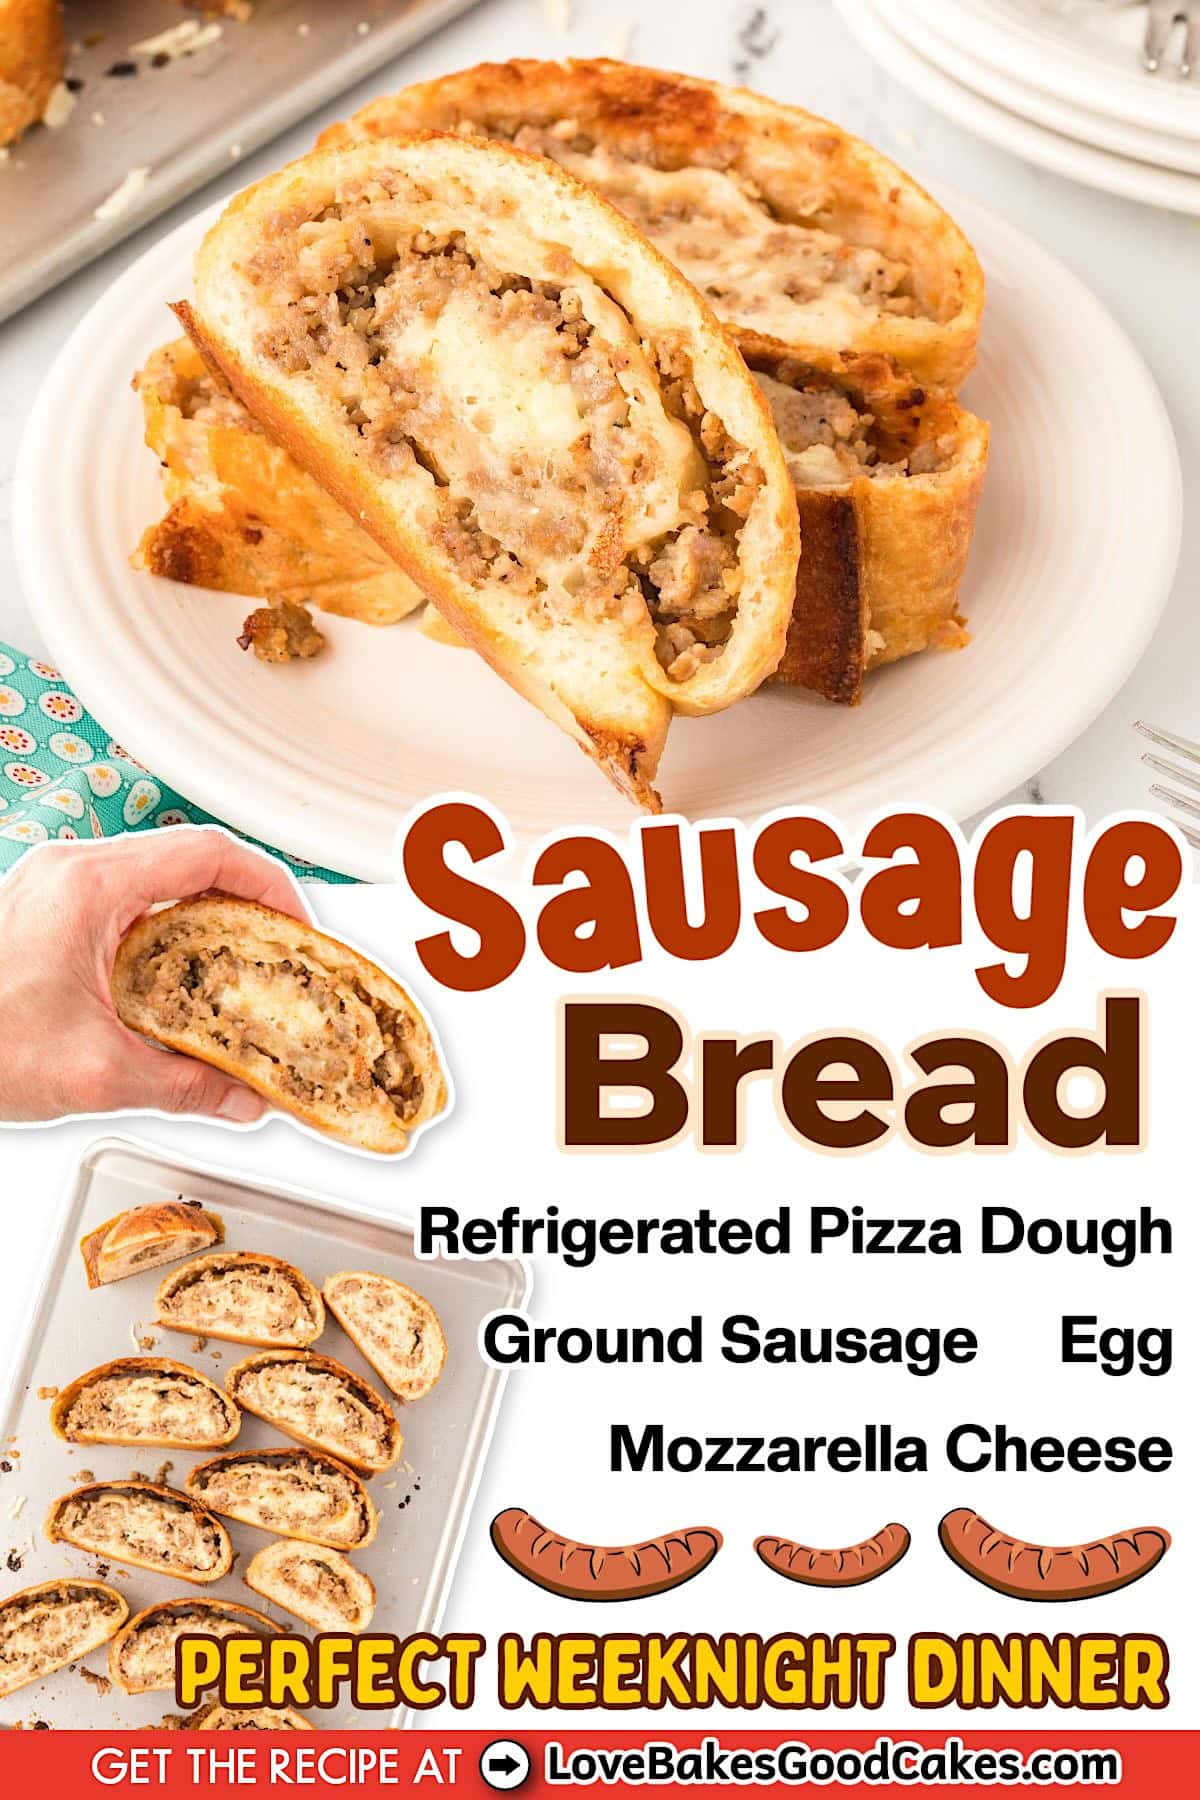 An image for sausage bread, featuring sliced pieces displaying the filling of ground sausage, cheese, and egg, all made using refrigerated pizza dough. The text promotes it as an ideal easy dinner idea for